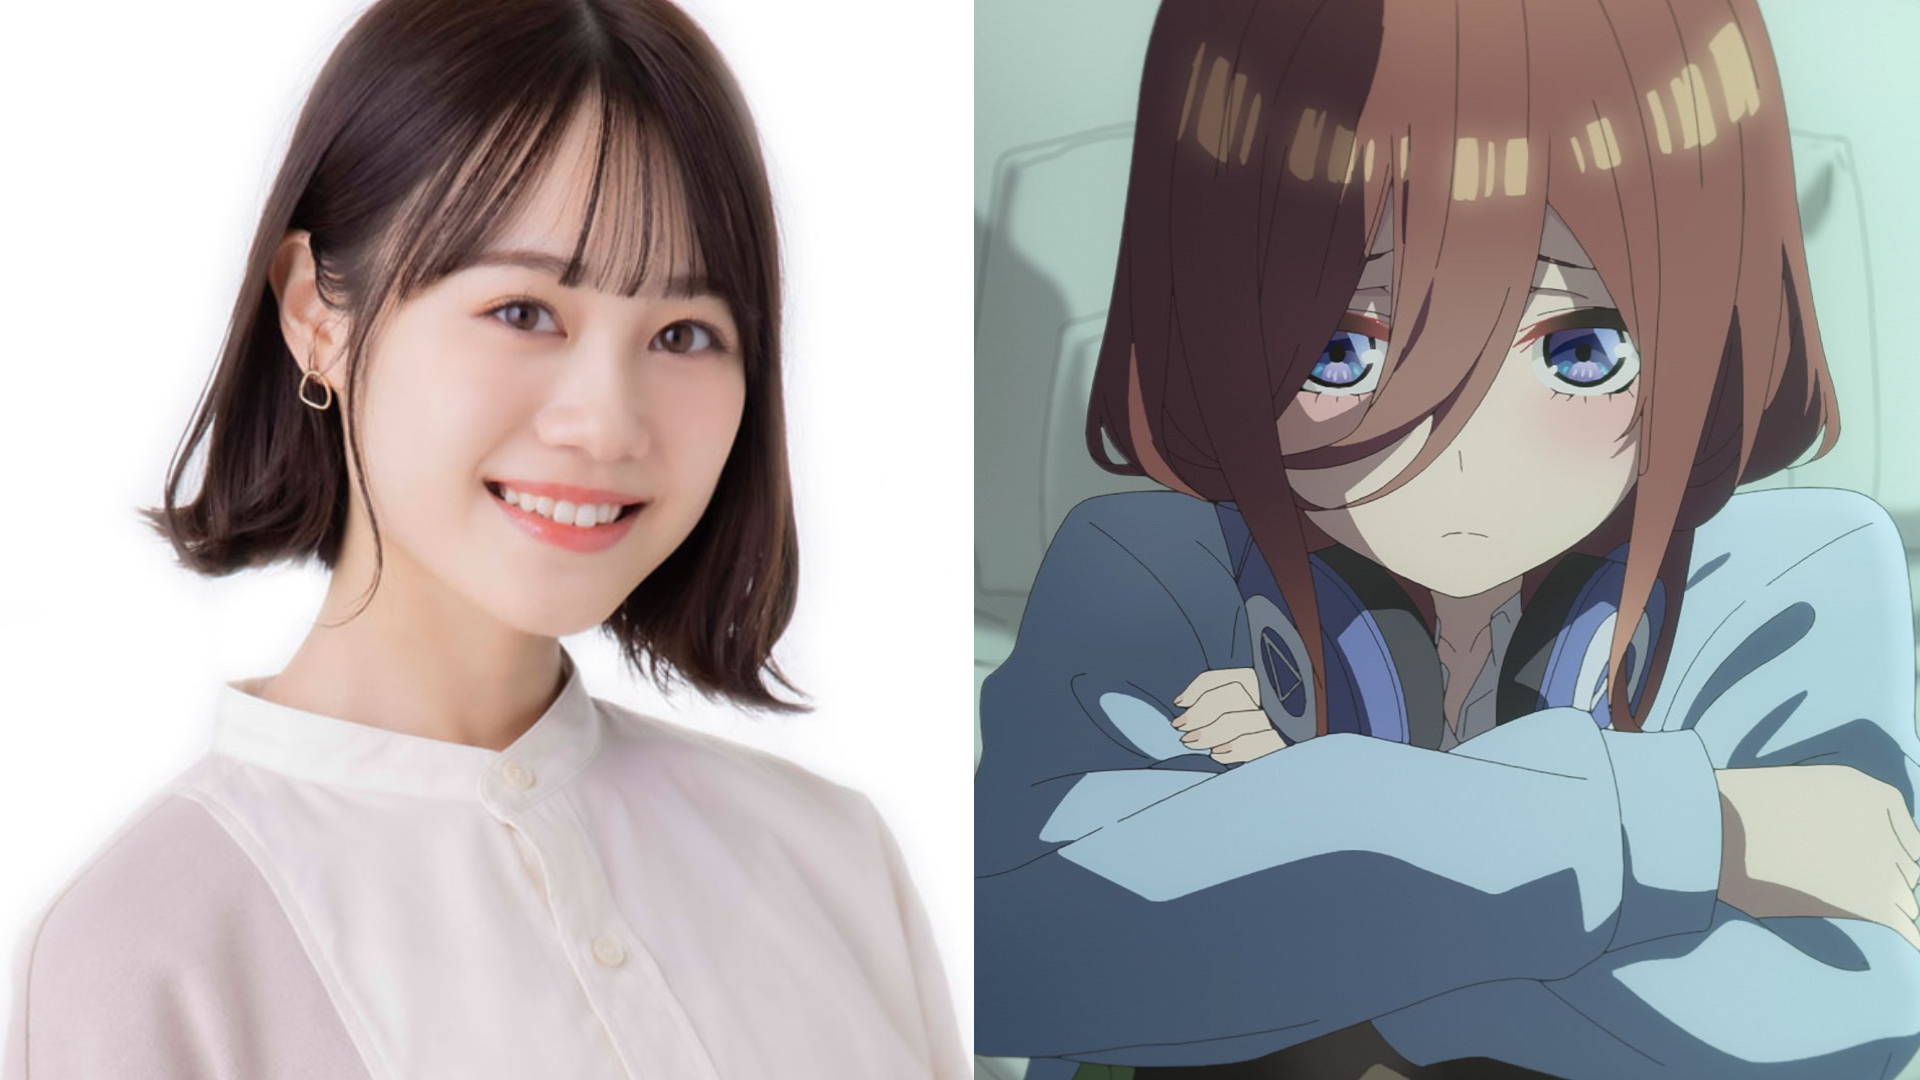 Voice Actress Miku Ito Releases Statement After Details About Her Private  Life Surface Online - Anime Corner